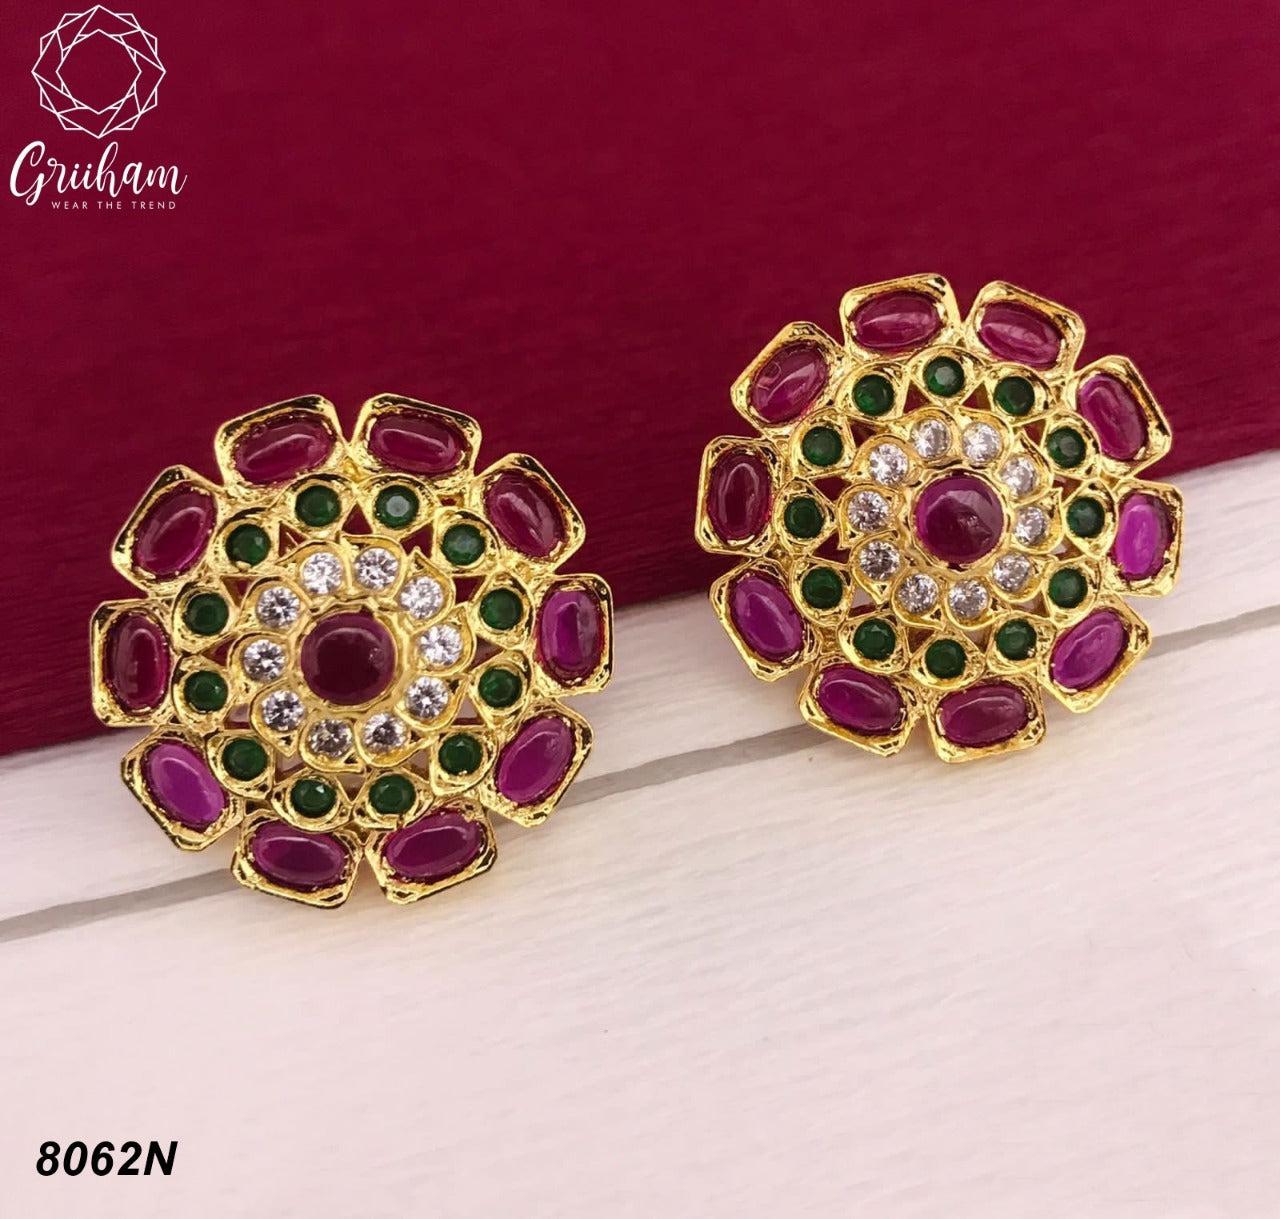 Micro Gold Finish Party Wear Earring / Jhumkas with AD stones 8062N-Jhumkas & Earrings-Griiham-Griiham